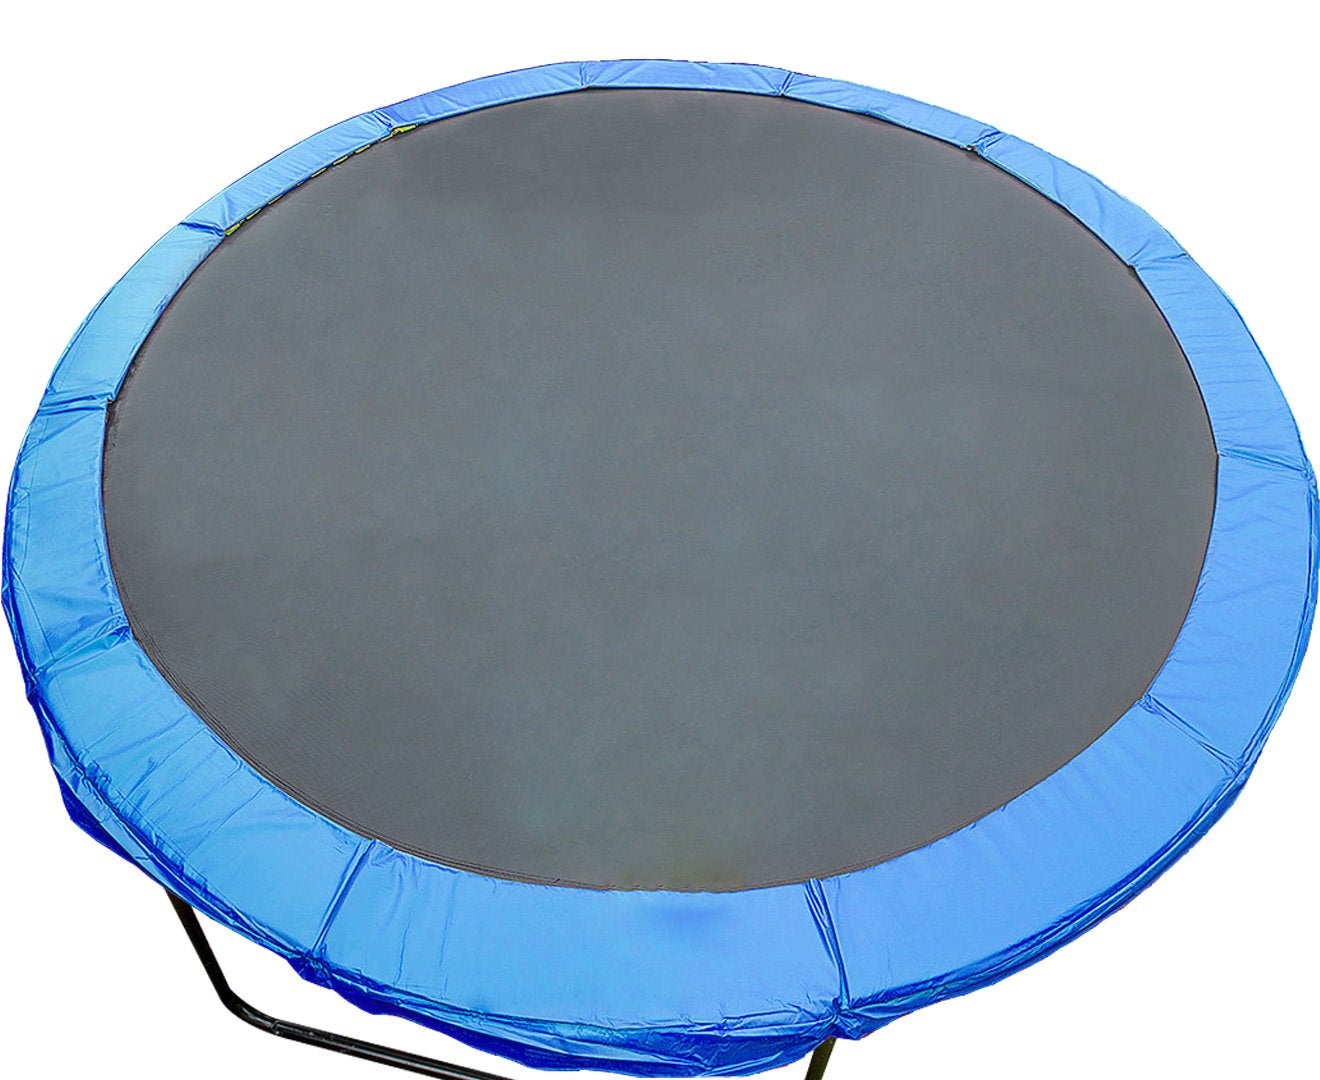 New 16ft Replacement Outdoor Round Trampoline Safety Spring Pad Cover